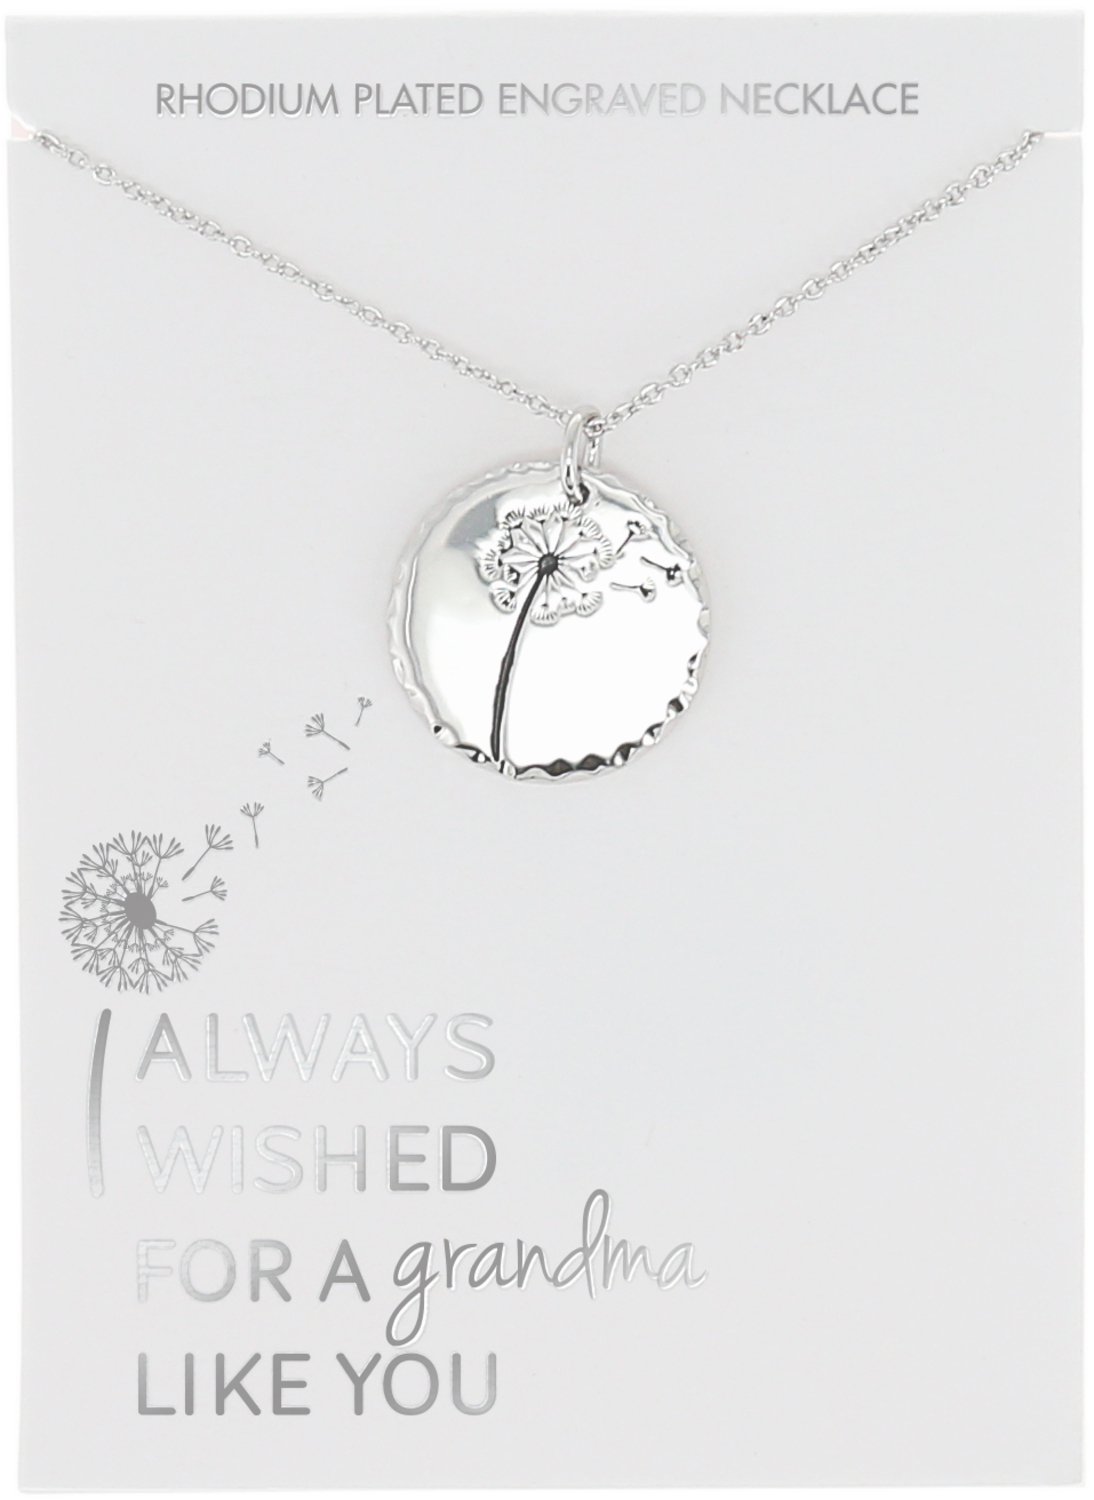 Grandma by I Always Wished - Grandma - 16.5"-18.5" Engraved Rhodium Plated  Necklace